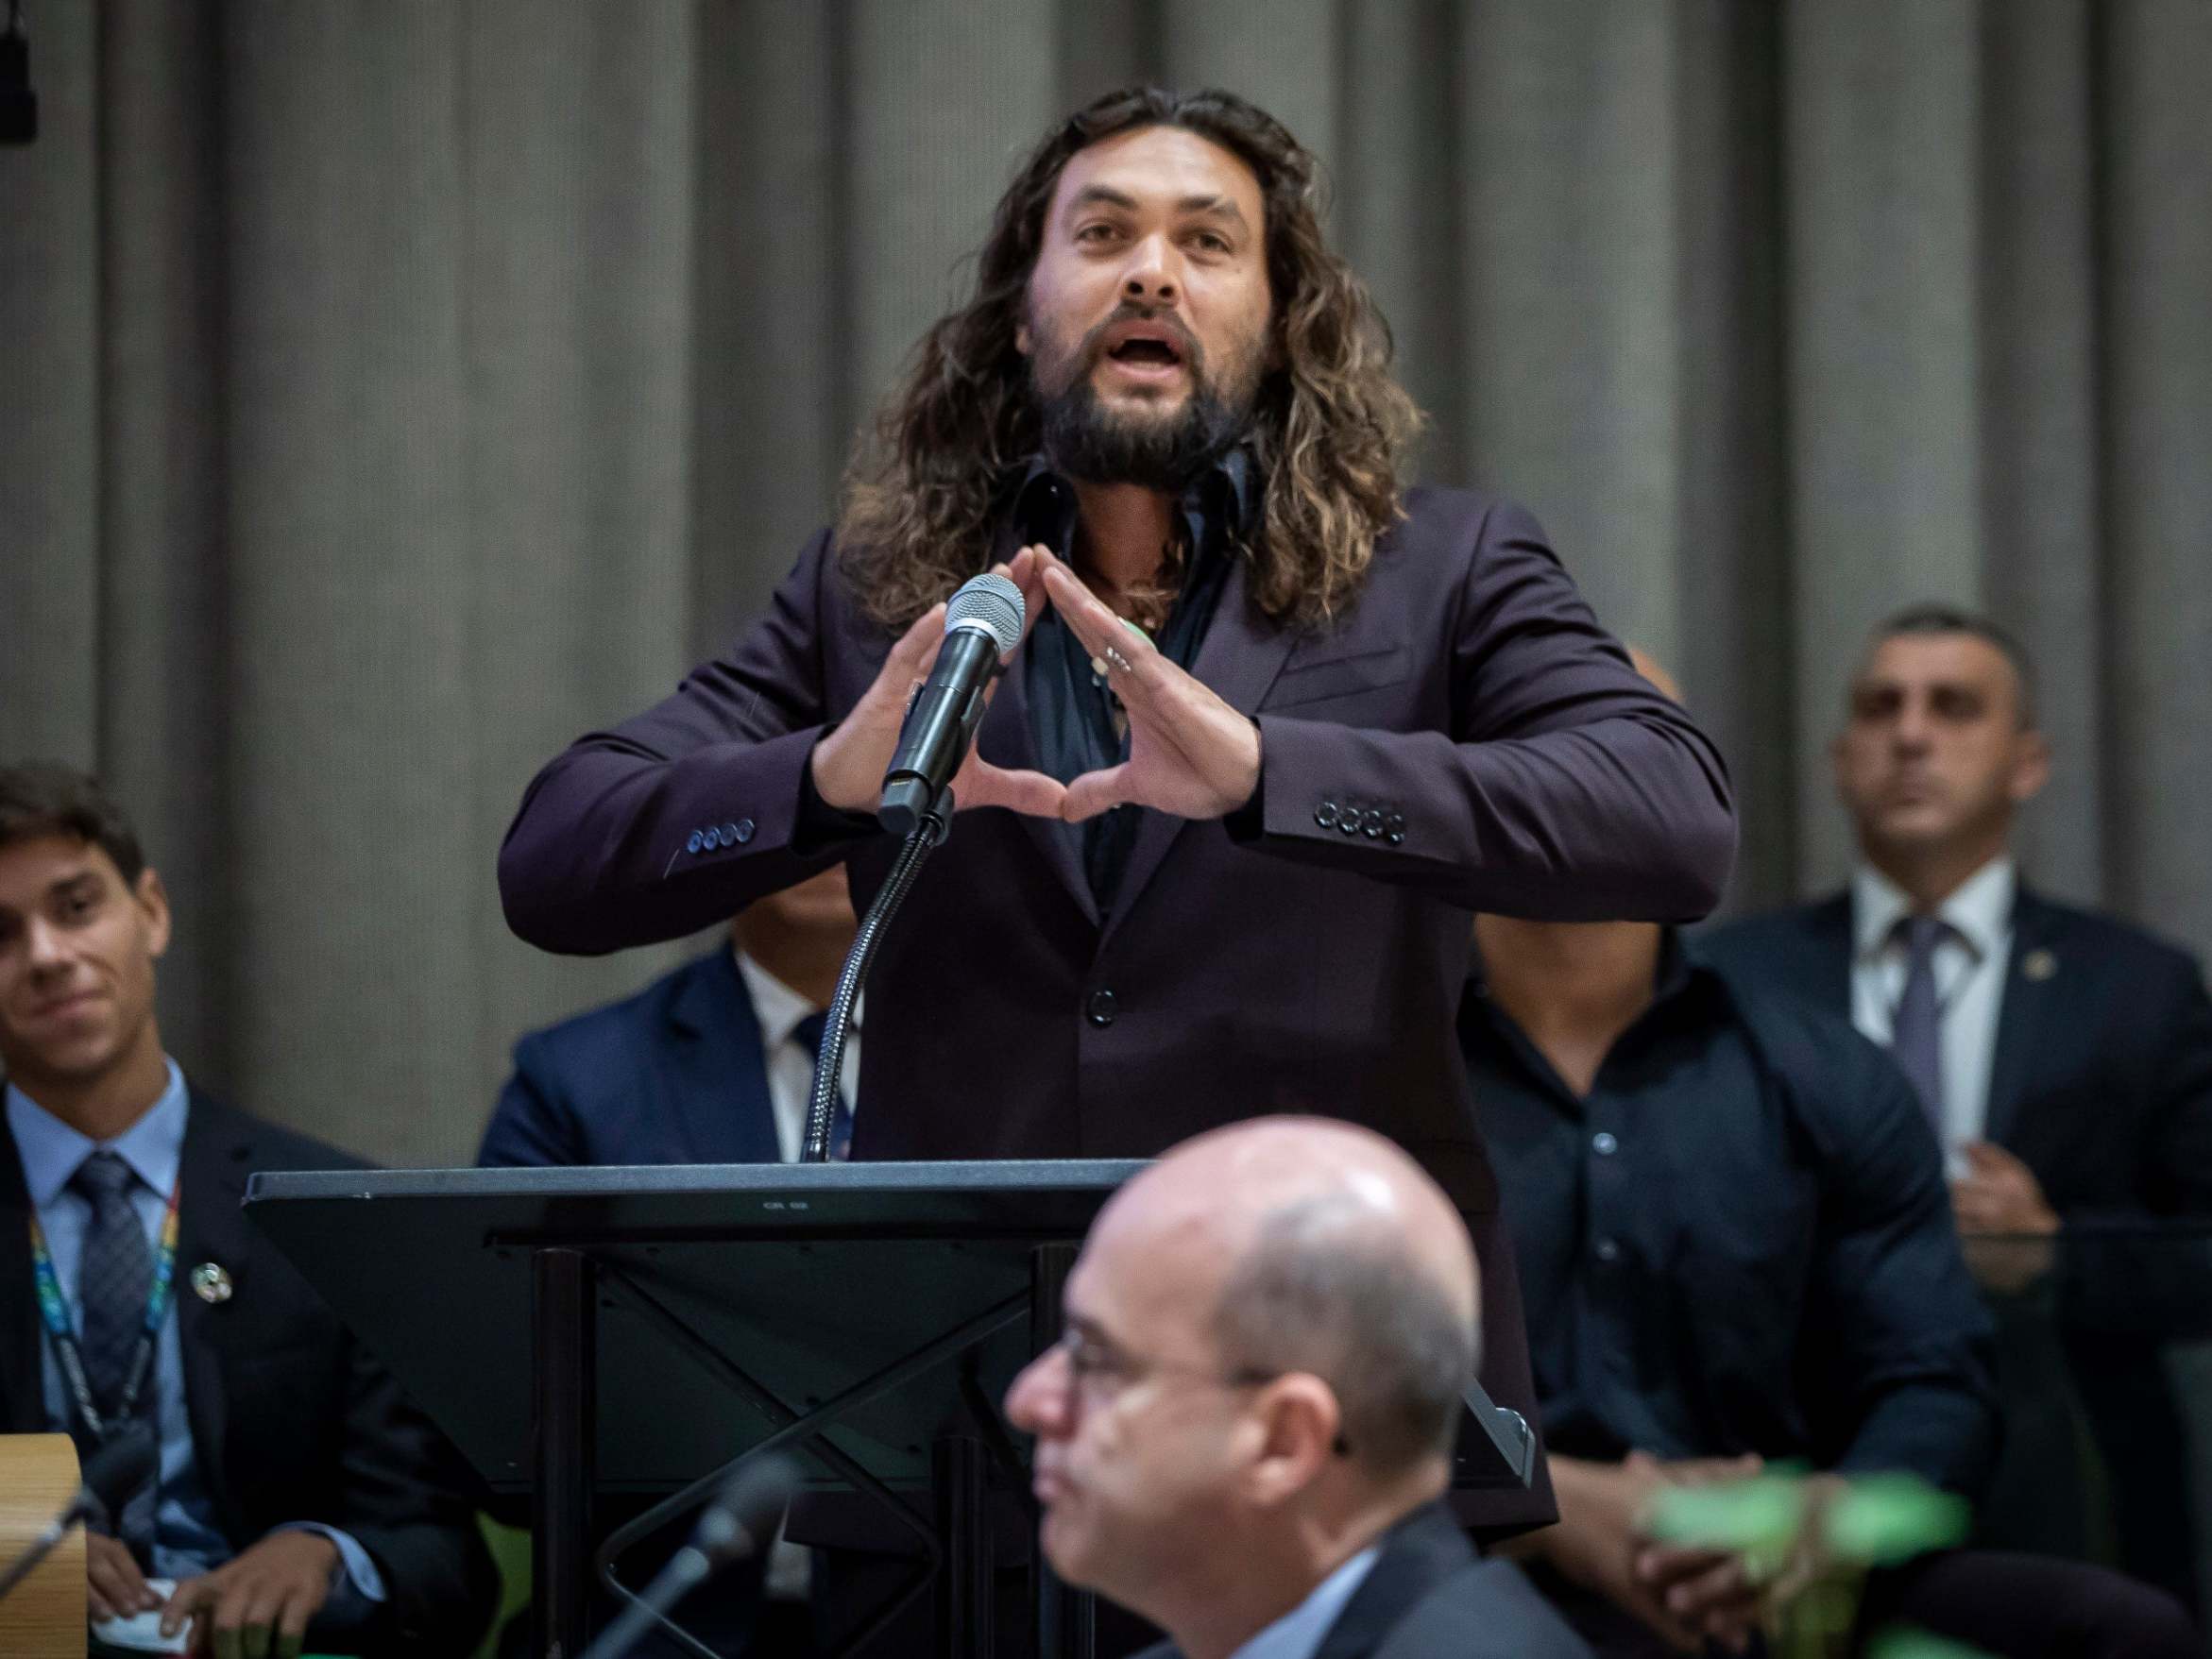 Jason Momoa delivers powerful speech on ‘global crisis’ of climate change at UN - The Independent